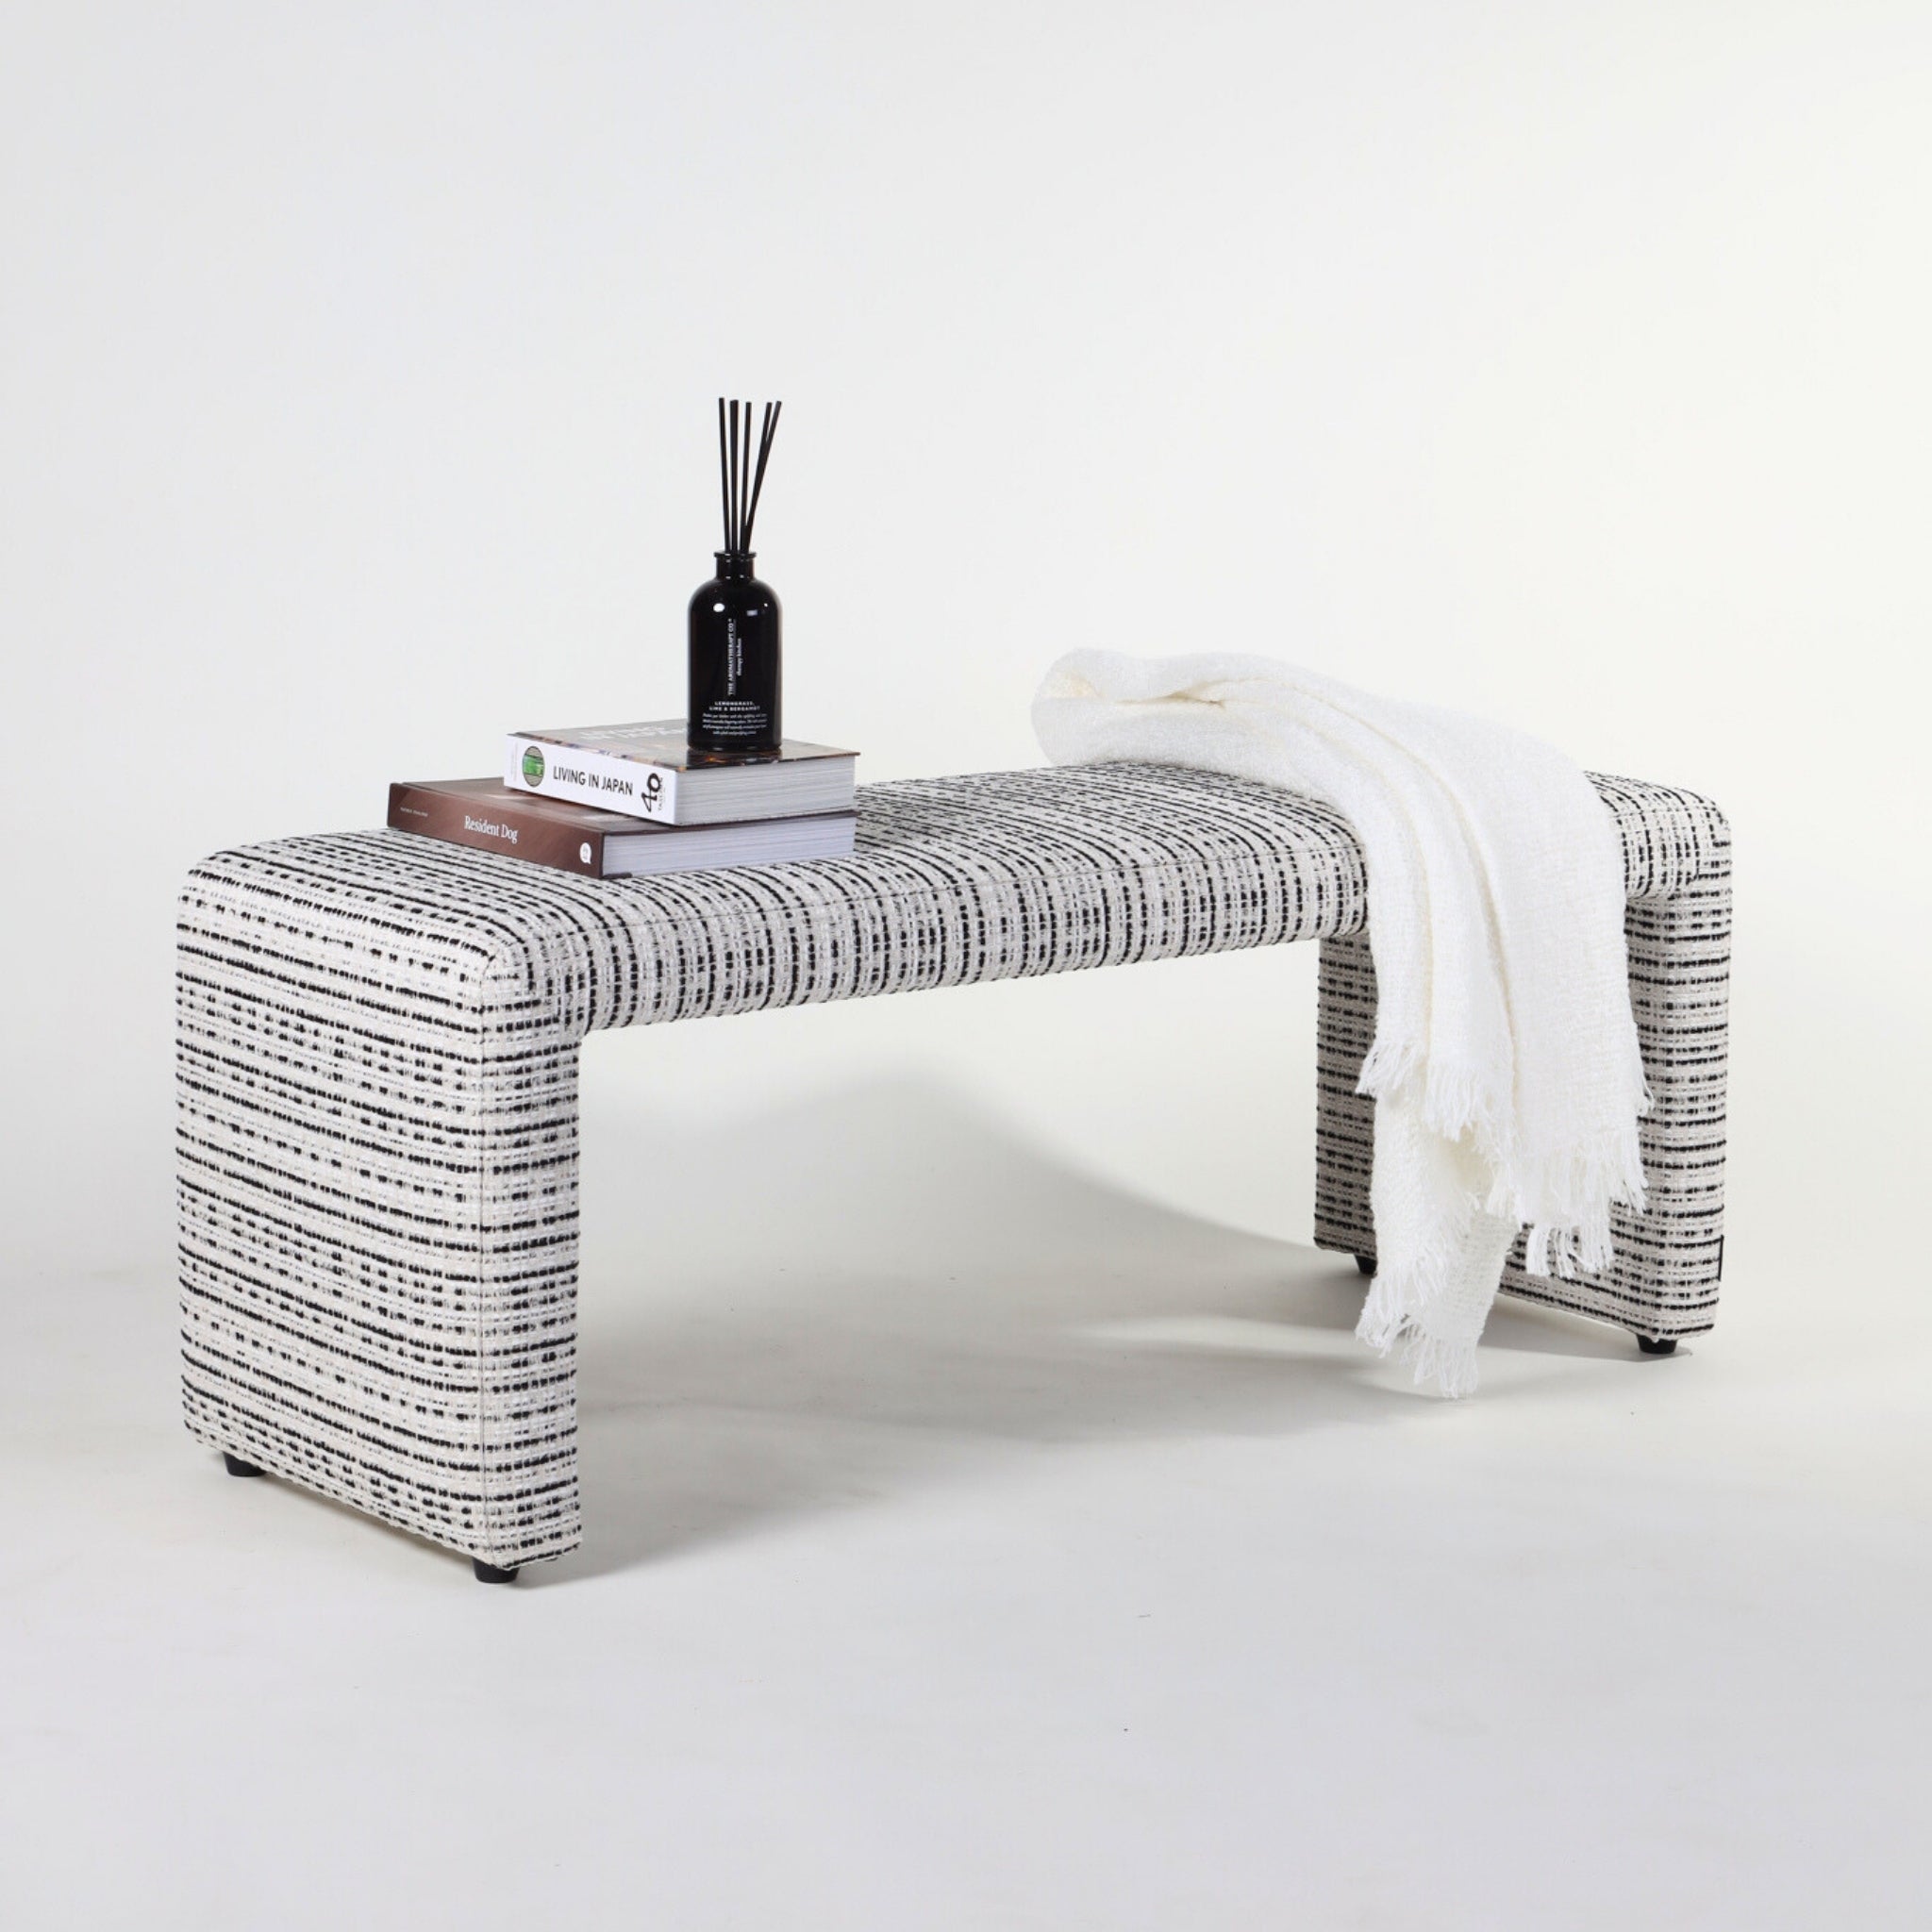 Upholstered Bench Seat - The Feelter